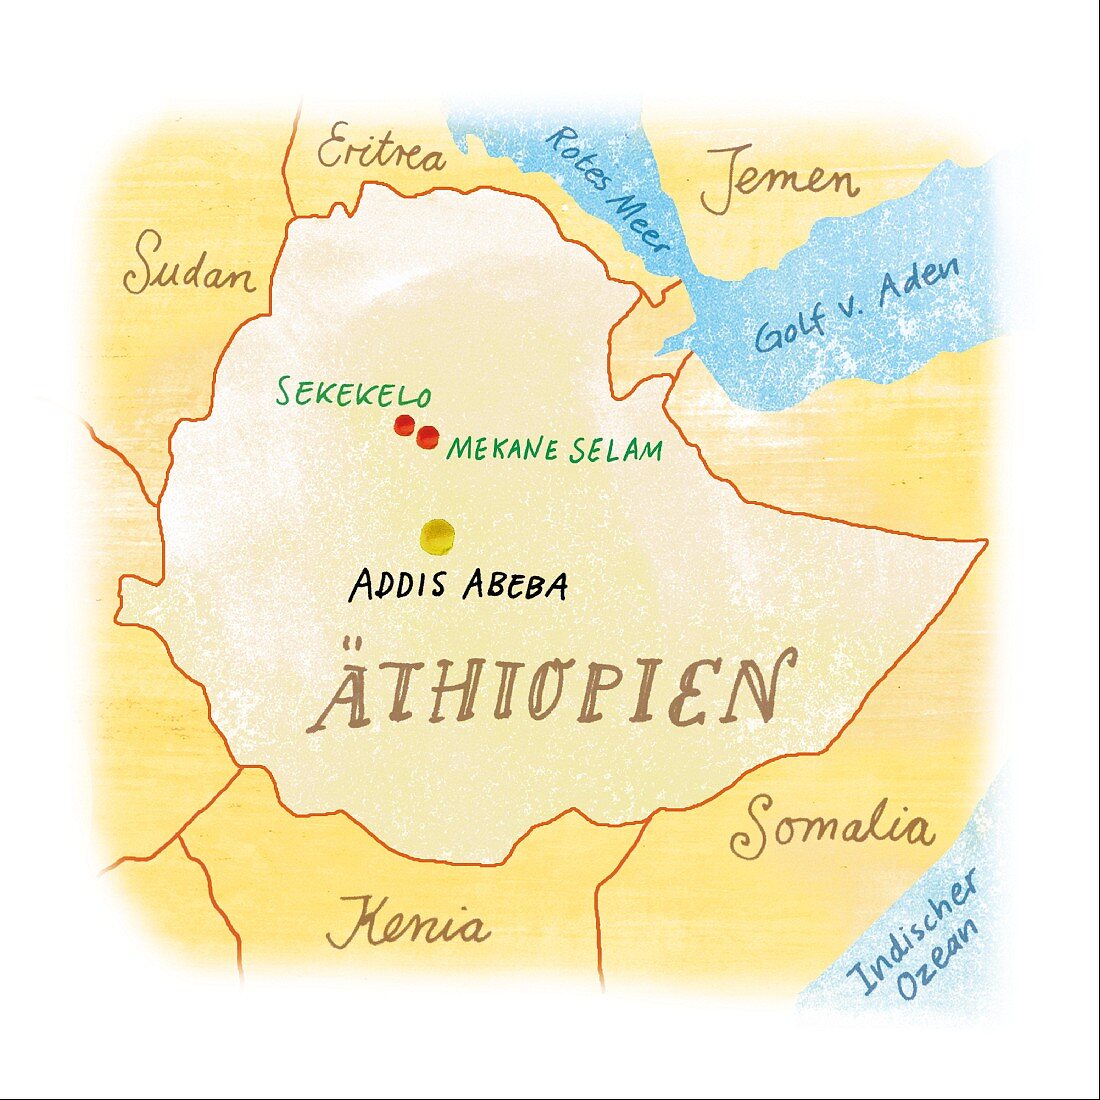 A map of Ethiopia